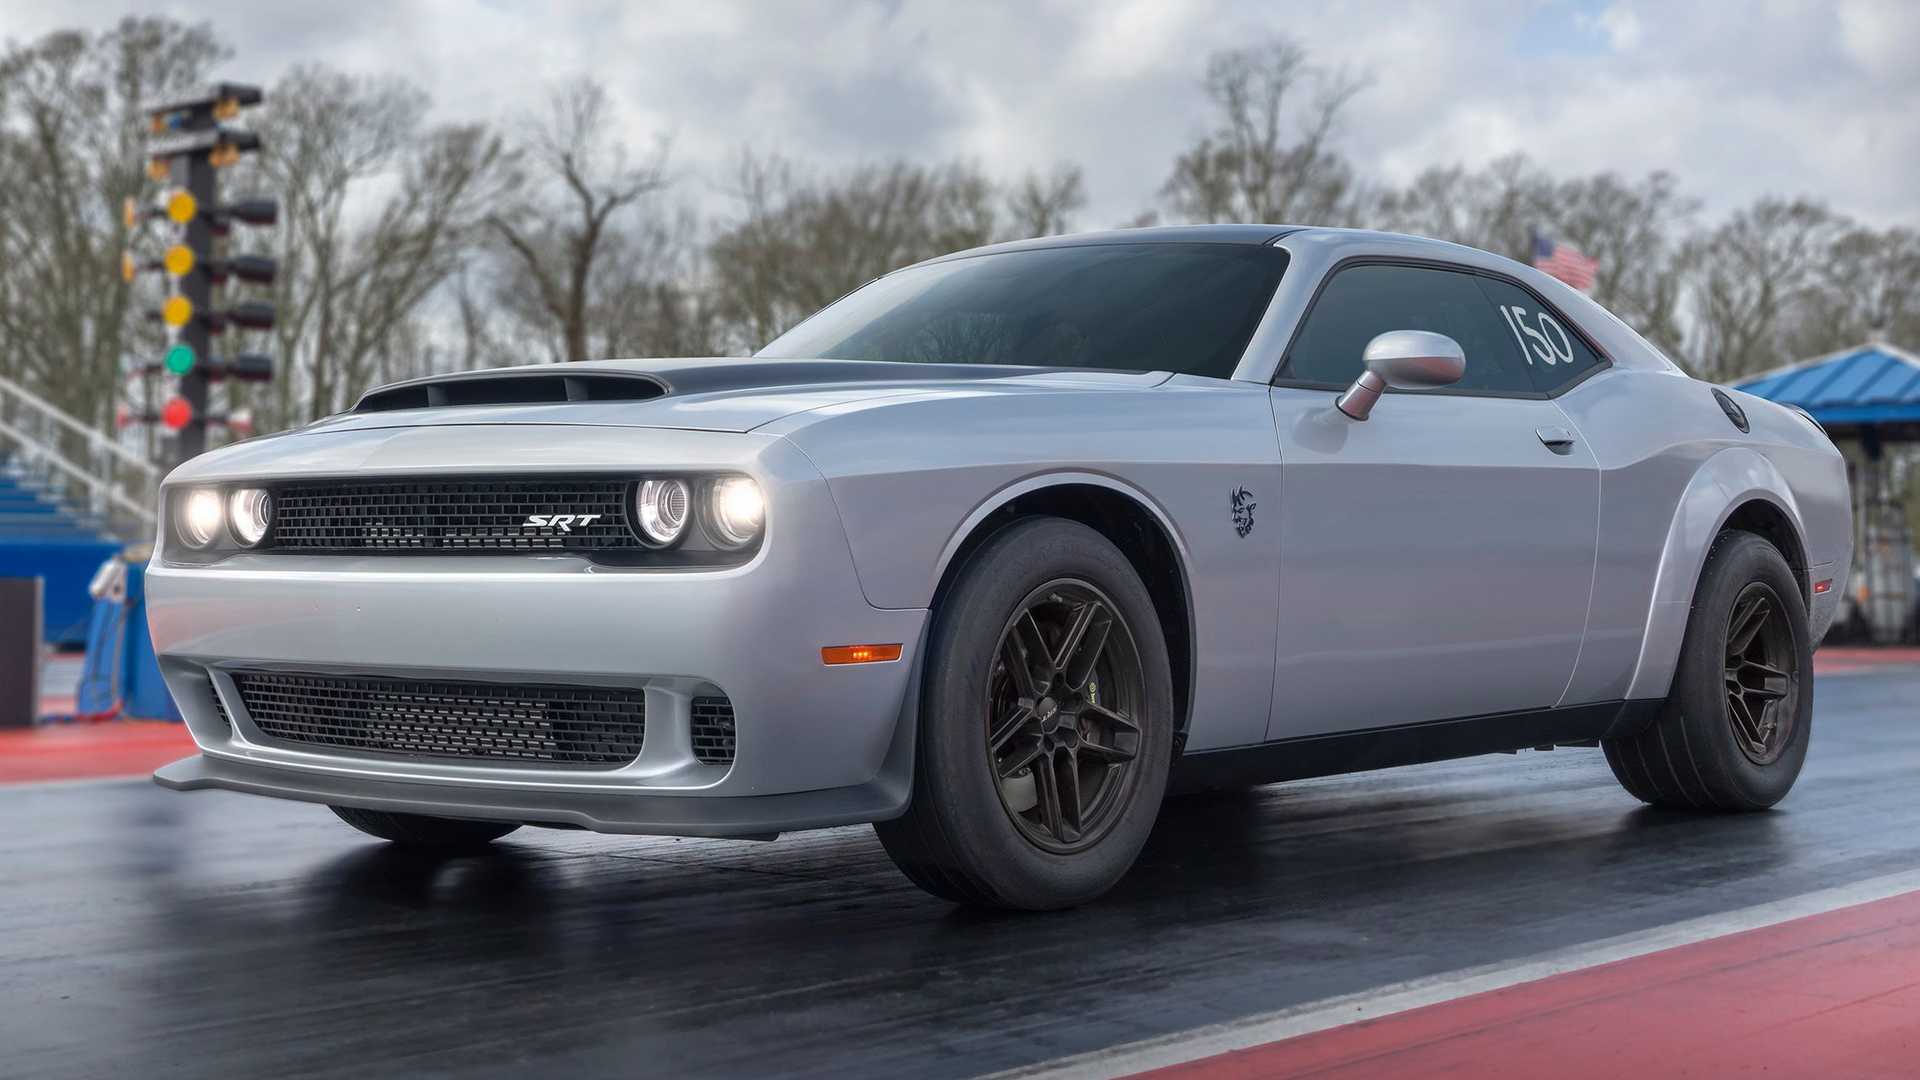 Dodge Debuts the 2023 Challenger SRT Demon 170, Producing 1,025 Horsepower and 945 lb-ft of Torque